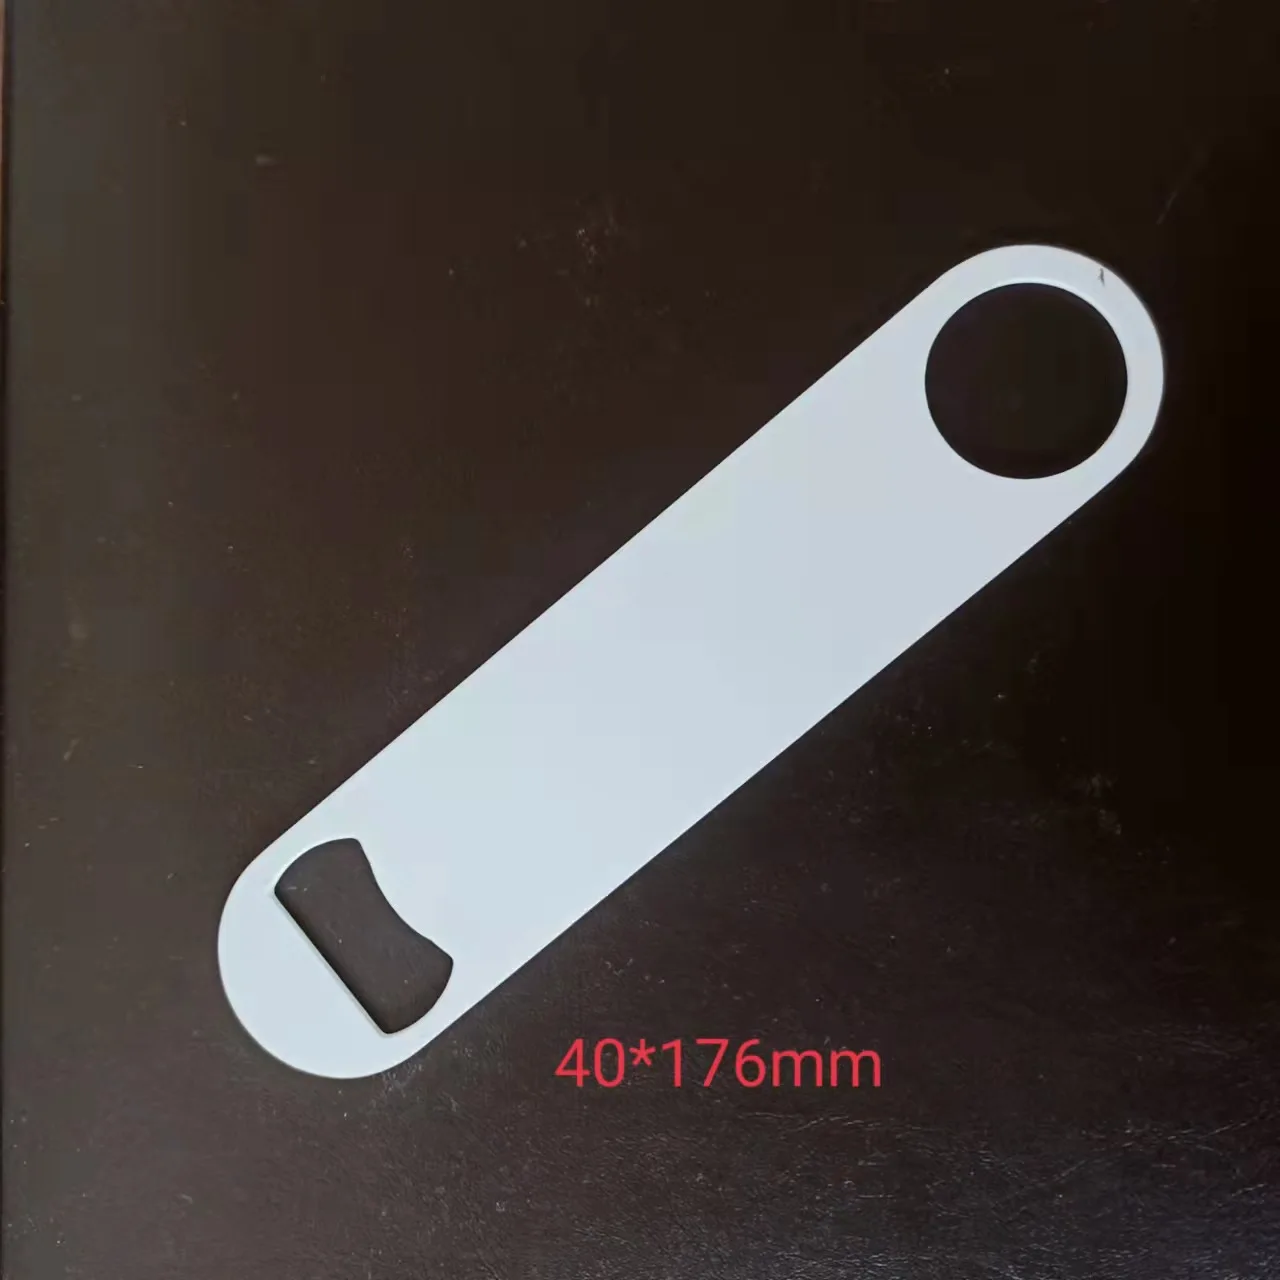 Factory Price!!! 100pcs/lot Bottle Beer Opener Cap Lifter Sublimation Blank White Dye INK Printing Heat Transfer High Quality factory price 2 3 4 layer white